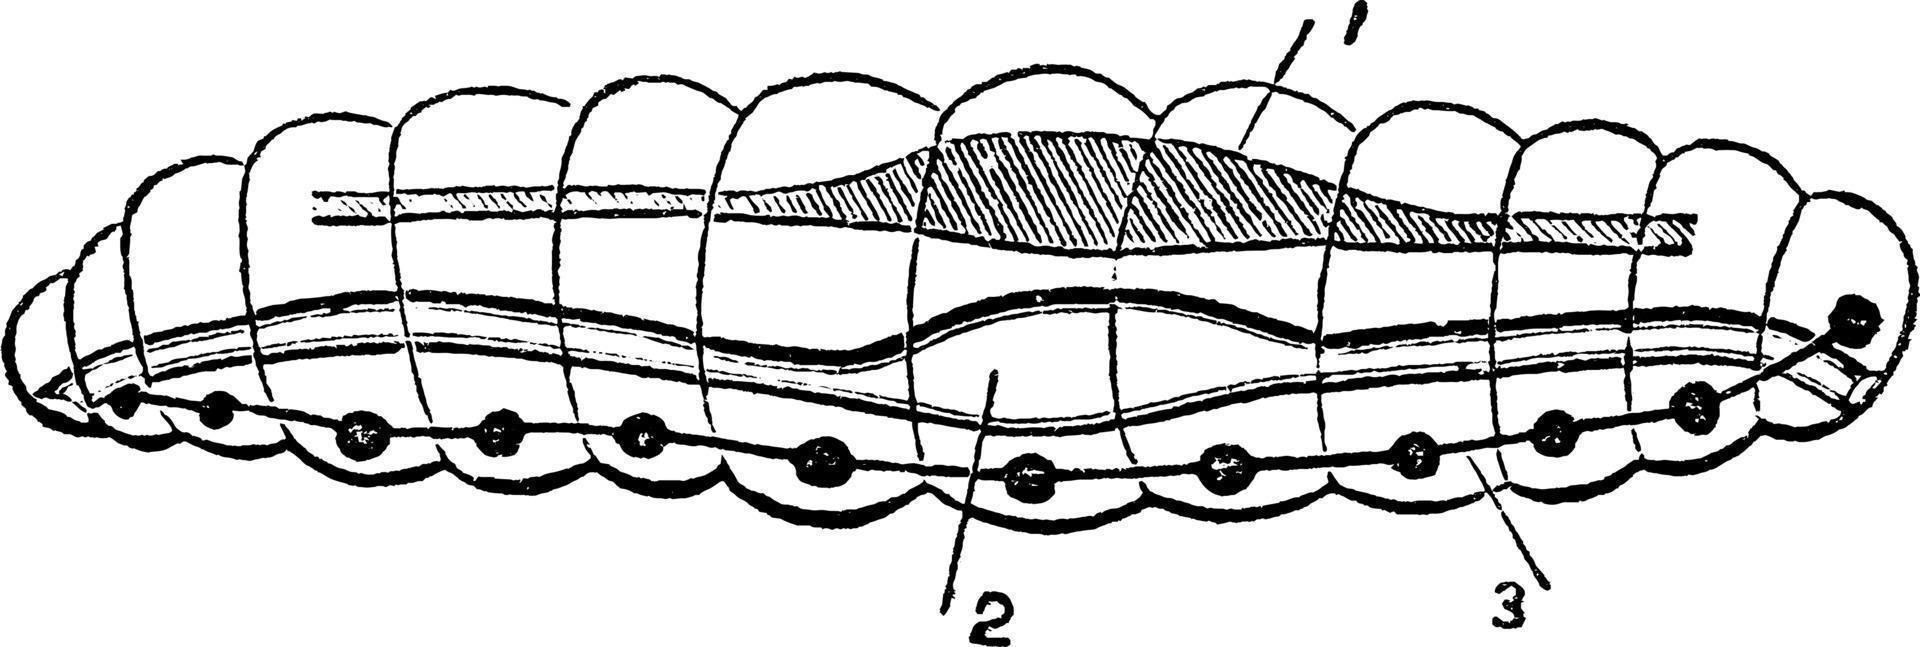 Diagram of an Annulosa, vintage illustration. vector